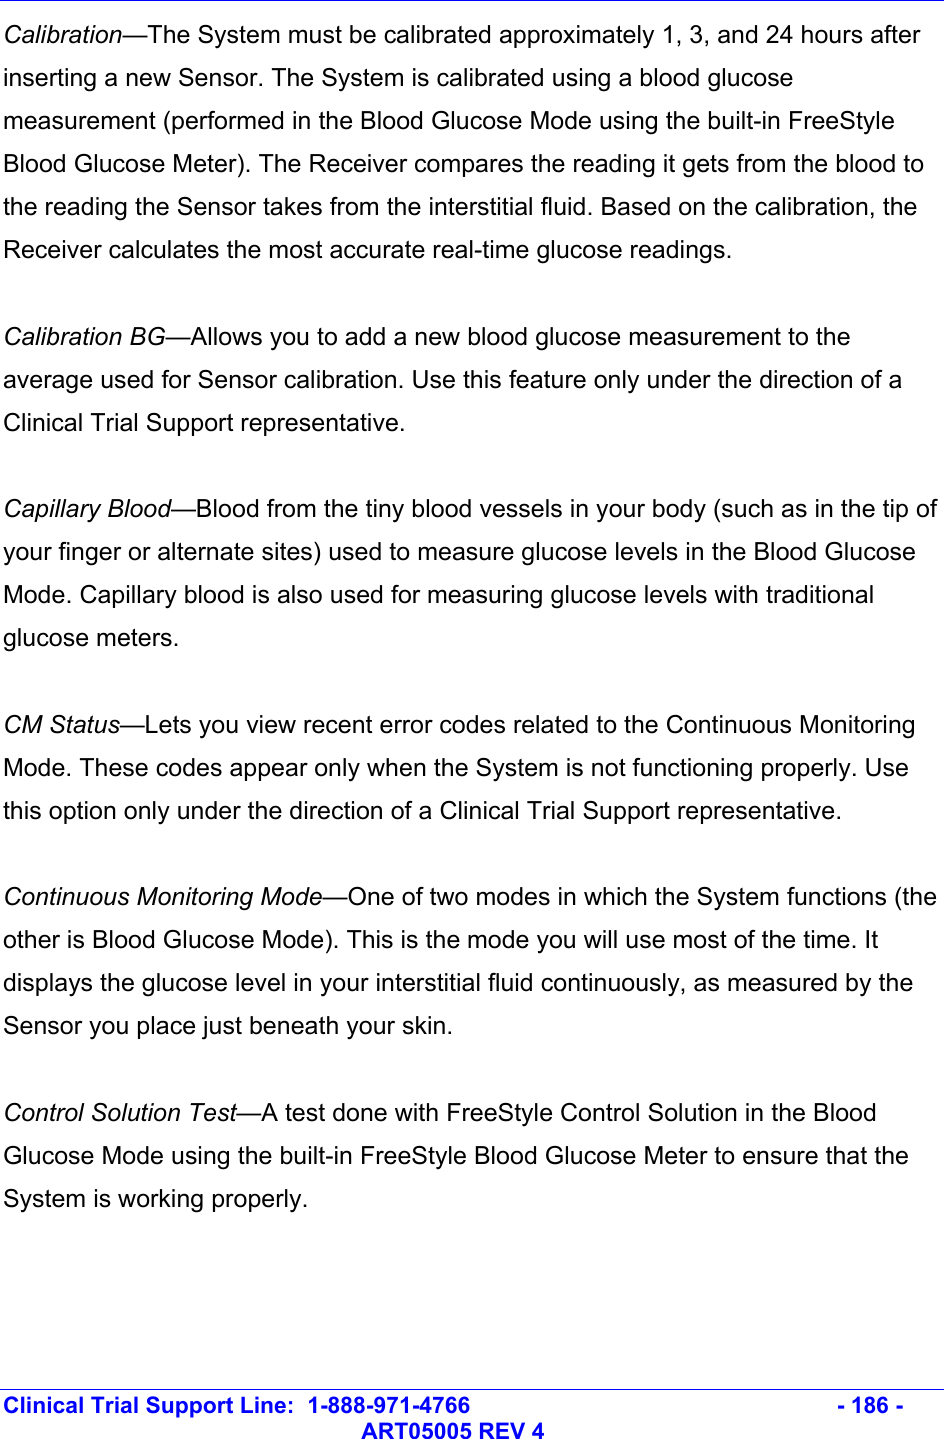   Clinical Trial Support Line:  1-888-971-4766   - 186 -   ART05005 REV 4 Calibration—The System must be calibrated approximately 1, 3, and 24 hours after inserting a new Sensor. The System is calibrated using a blood glucose measurement (performed in the Blood Glucose Mode using the built-in FreeStyle Blood Glucose Meter). The Receiver compares the reading it gets from the blood to the reading the Sensor takes from the interstitial fluid. Based on the calibration, the Receiver calculates the most accurate real-time glucose readings.  Calibration BG—Allows you to add a new blood glucose measurement to the average used for Sensor calibration. Use this feature only under the direction of a Clinical Trial Support representative.  Capillary Blood—Blood from the tiny blood vessels in your body (such as in the tip of your finger or alternate sites) used to measure glucose levels in the Blood Glucose Mode. Capillary blood is also used for measuring glucose levels with traditional glucose meters.  CM Status—Lets you view recent error codes related to the Continuous Monitoring Mode. These codes appear only when the System is not functioning properly. Use this option only under the direction of a Clinical Trial Support representative.  Continuous Monitoring Mode—One of two modes in which the System functions (the other is Blood Glucose Mode). This is the mode you will use most of the time. It displays the glucose level in your interstitial fluid continuously, as measured by the Sensor you place just beneath your skin.  Control Solution Test—A test done with FreeStyle Control Solution in the Blood Glucose Mode using the built-in FreeStyle Blood Glucose Meter to ensure that the System is working properly.  